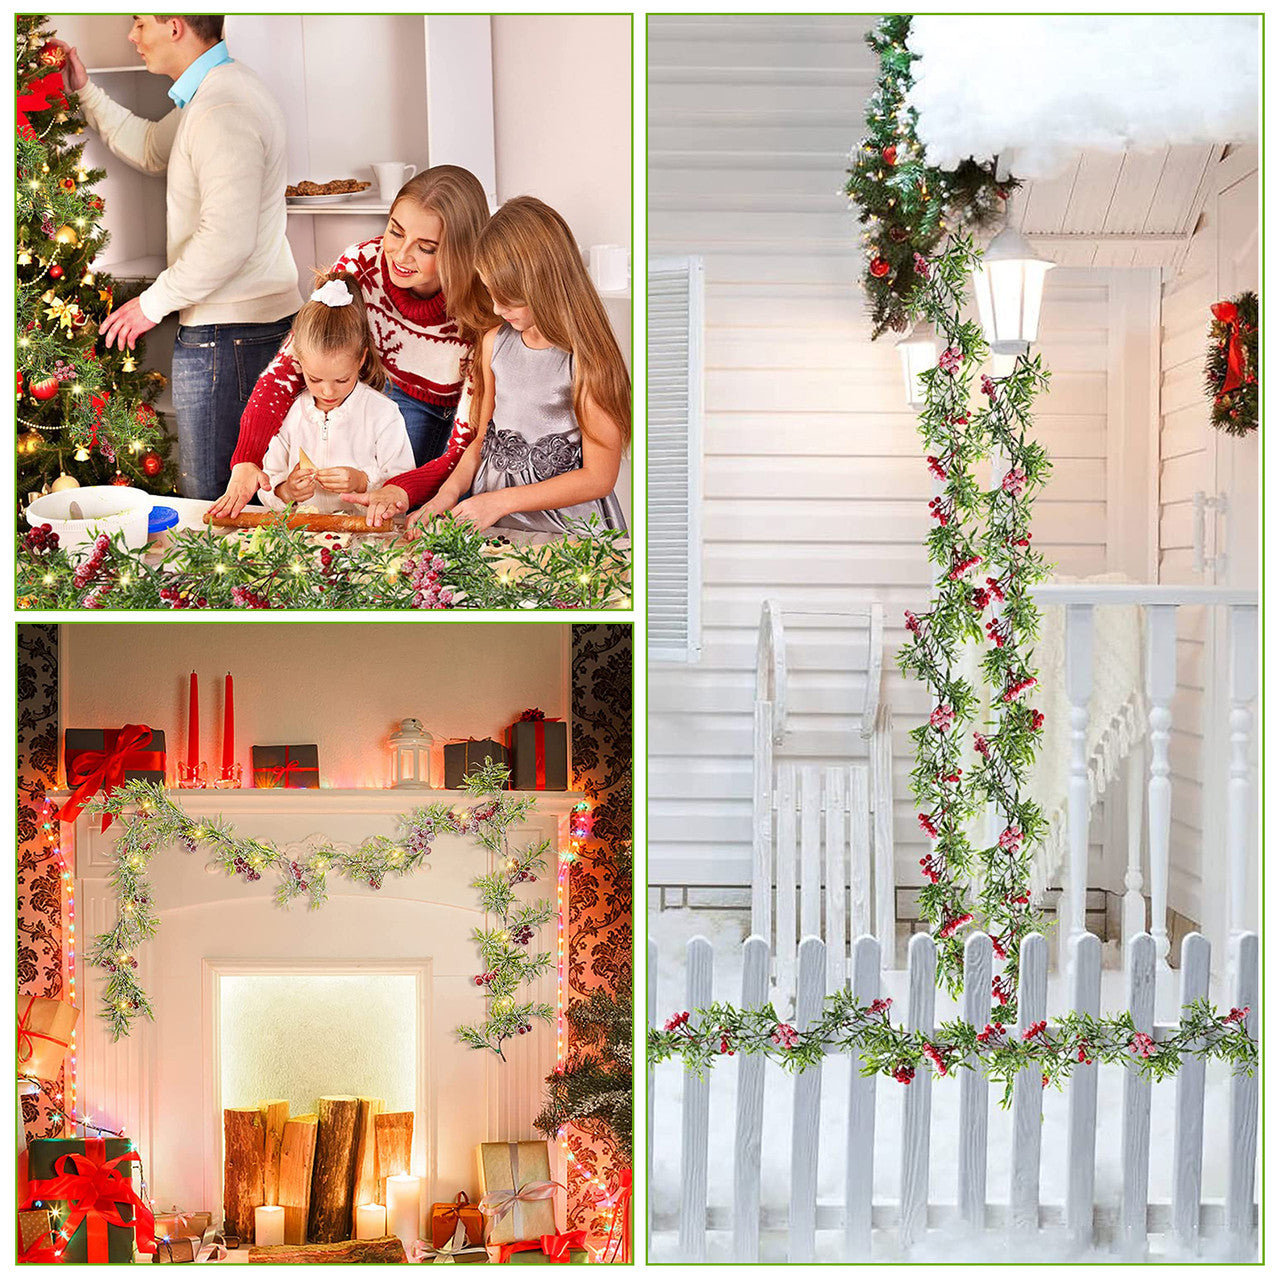 Artificial Christmas Wreath Garland lights - Battery Operated 5.9ft Prelit Garland with 20 LED lights for Xmas Tree Home Fireplace Party